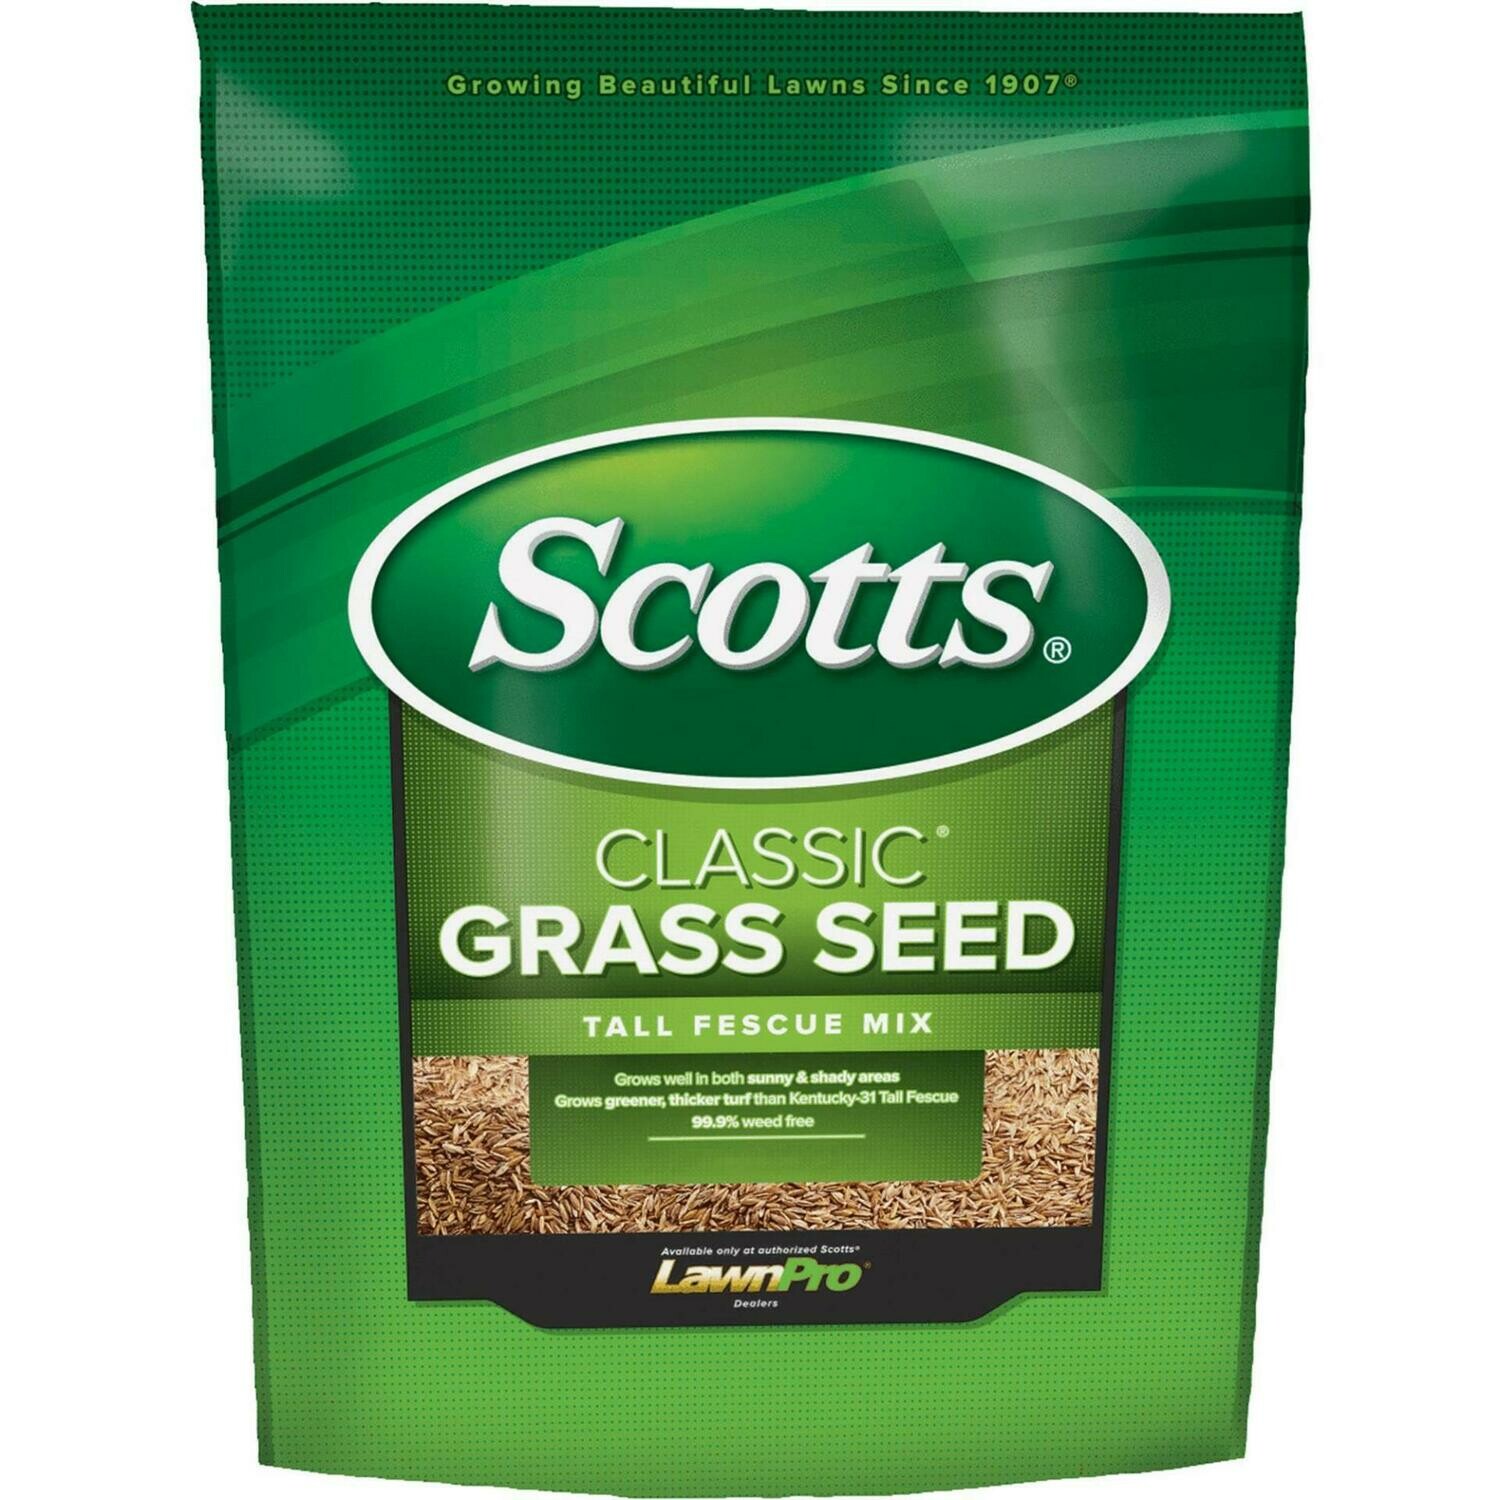 Scotts Classic Tall Fescue Grass Seed 3lbs.